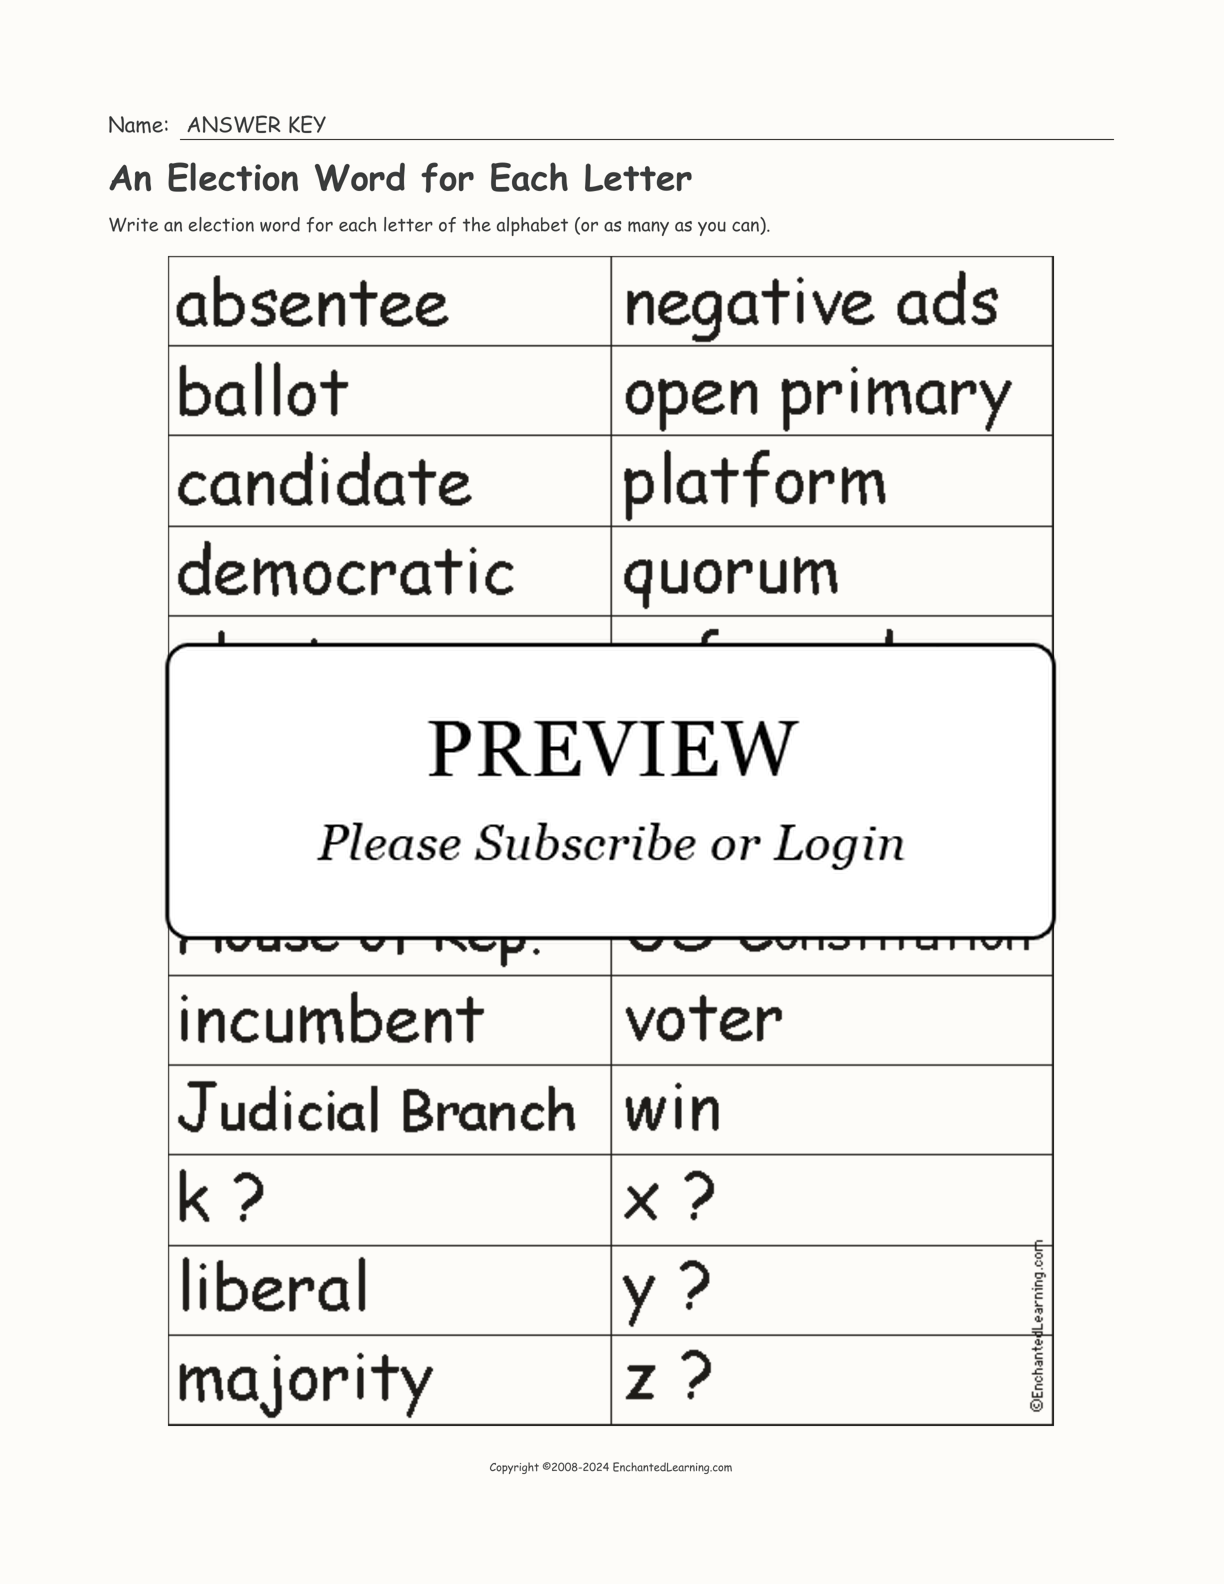 An Election Word for Each Letter interactive worksheet page 2